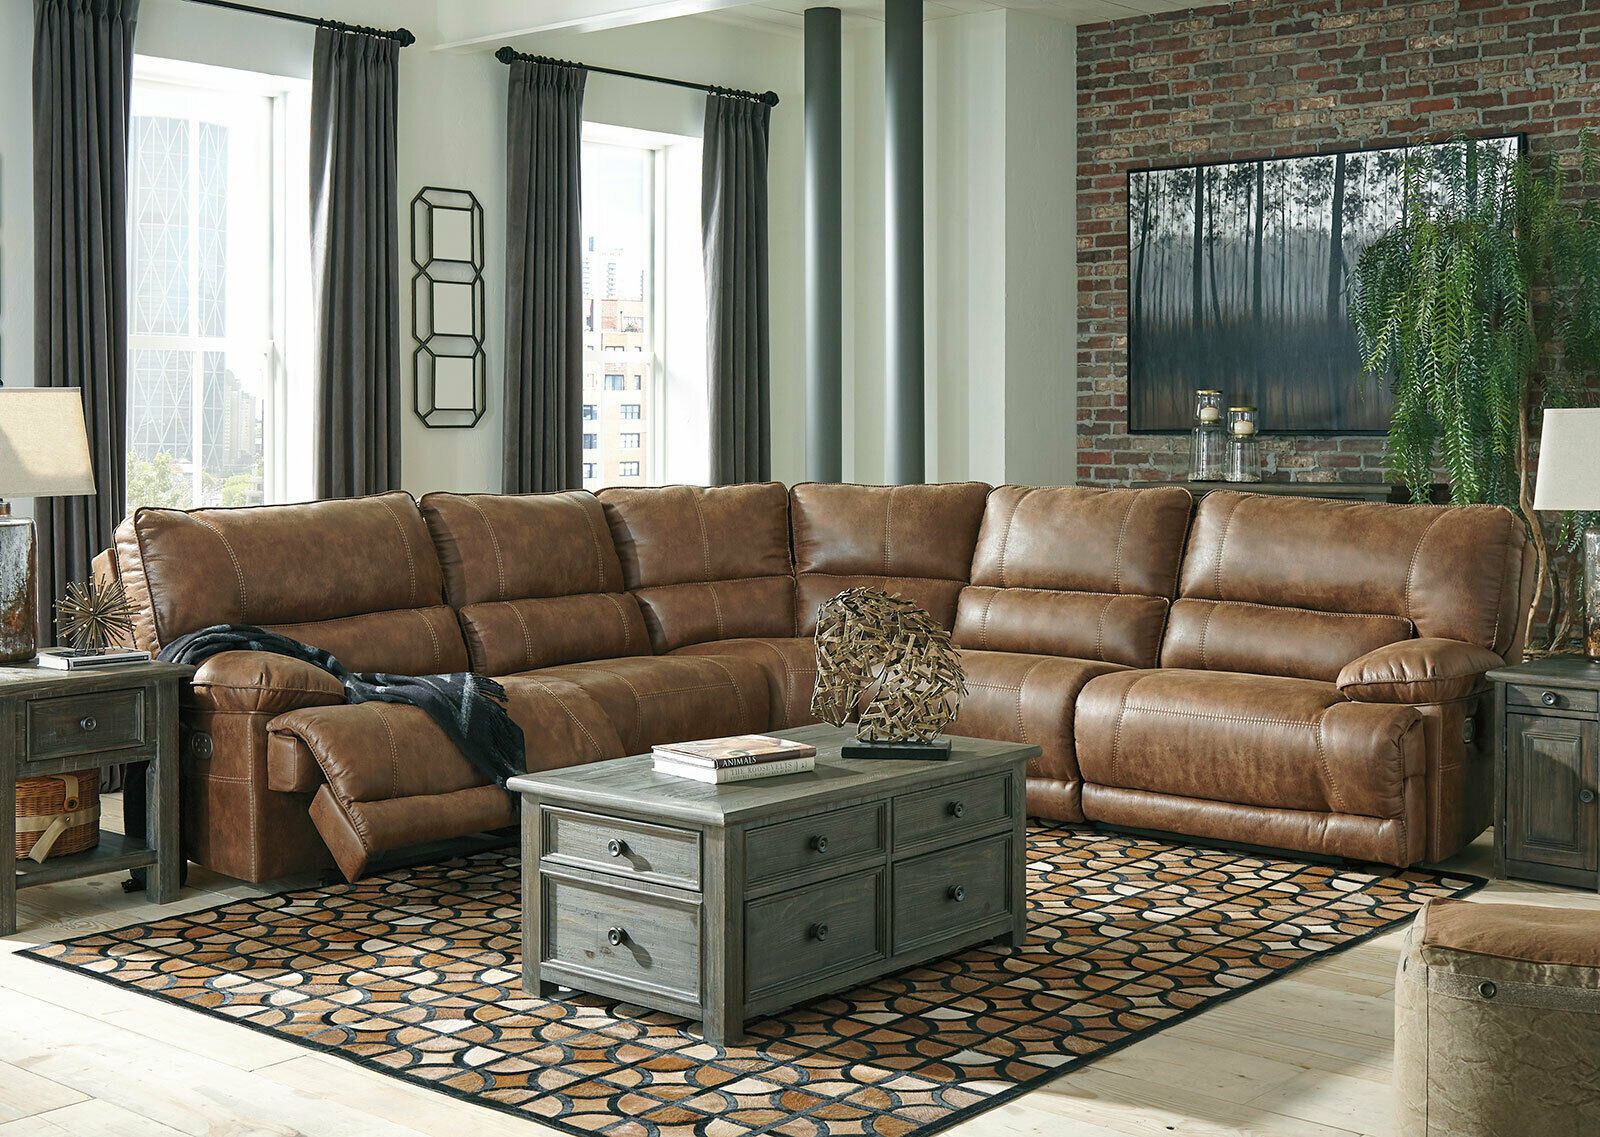 Hamburg 5pcs Sectional Living Room Brown Faux Leather Power Reclining Within Faux Leather Sectional Sofa Sets (Gallery 3 of 21)